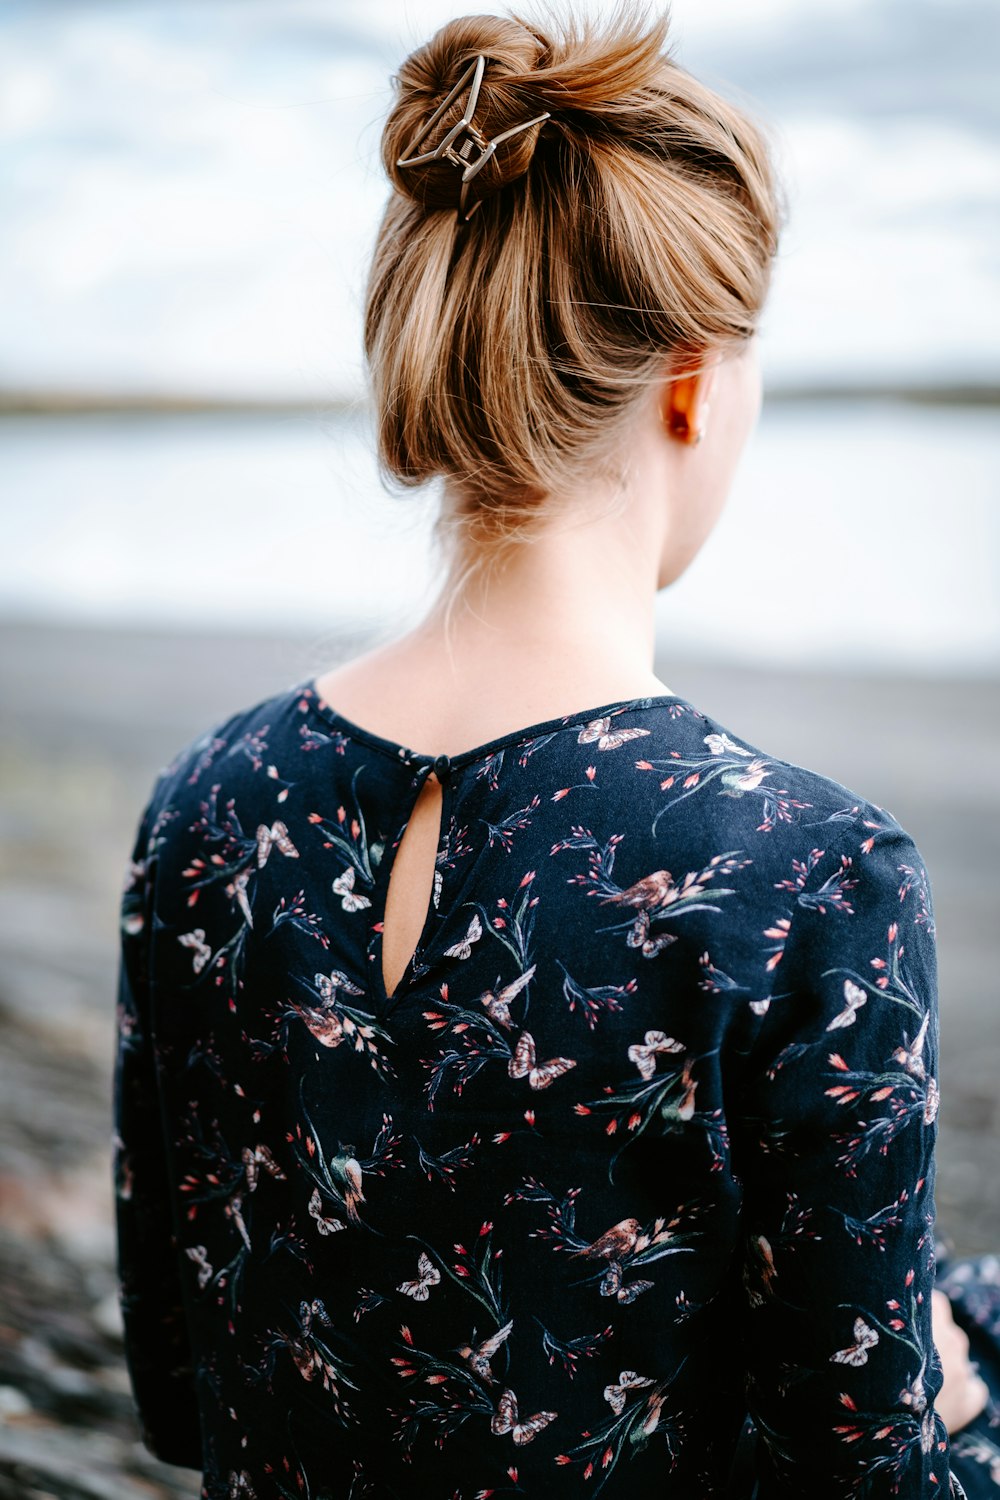 back of a person with a ponytail